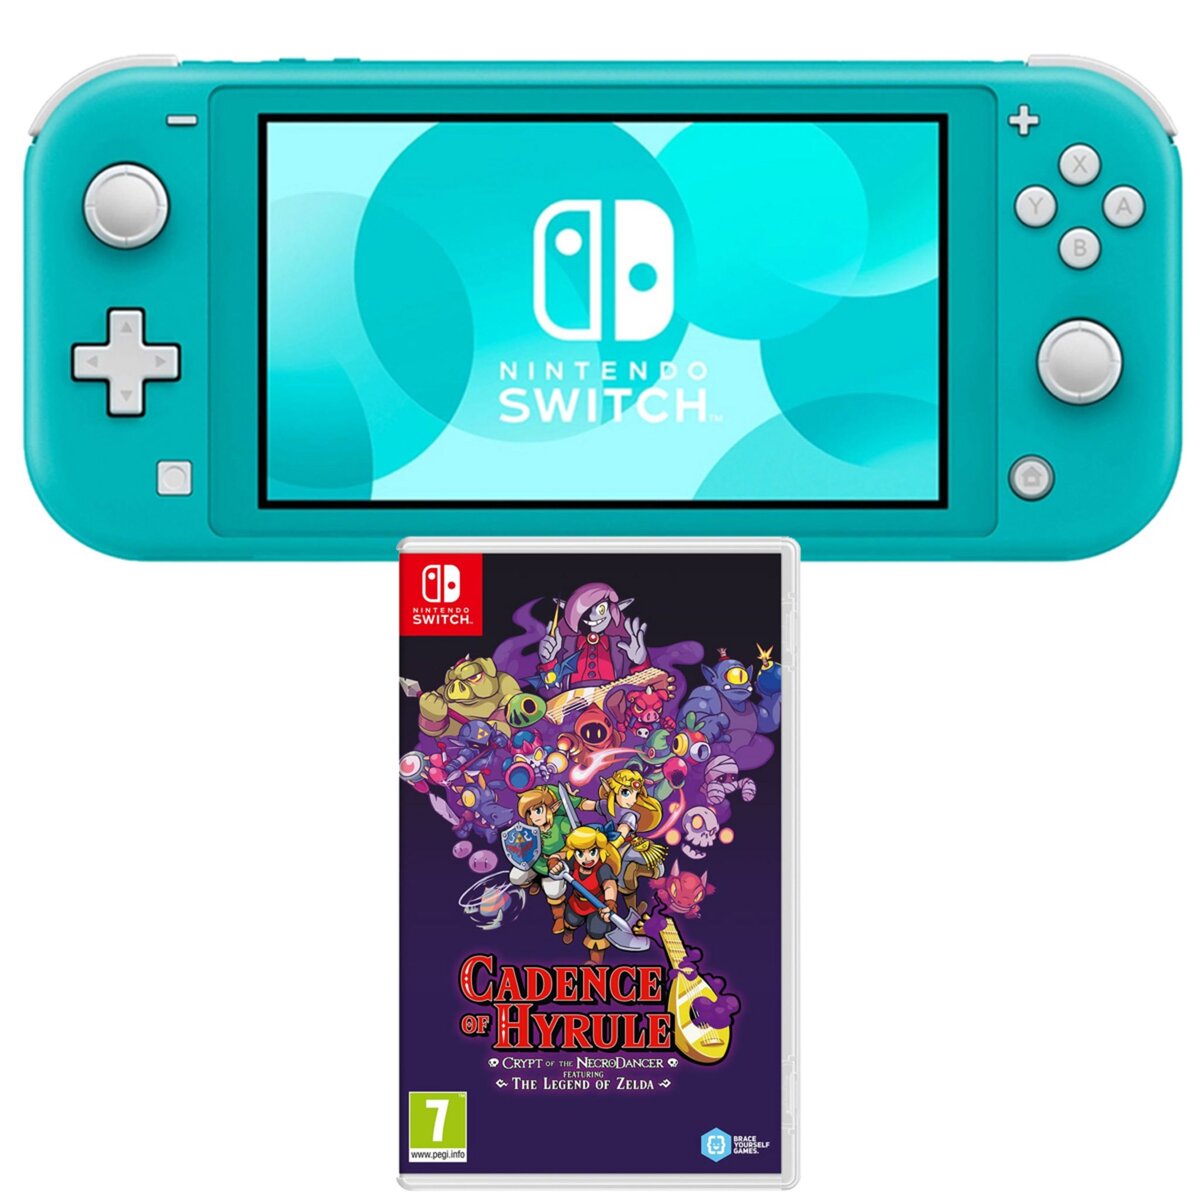 NINTENDO Console Nintendo Switch Lite Turquoise + Cadence of Hyrule Crypt of the Necrodancer Featuring The Legend of Zelda